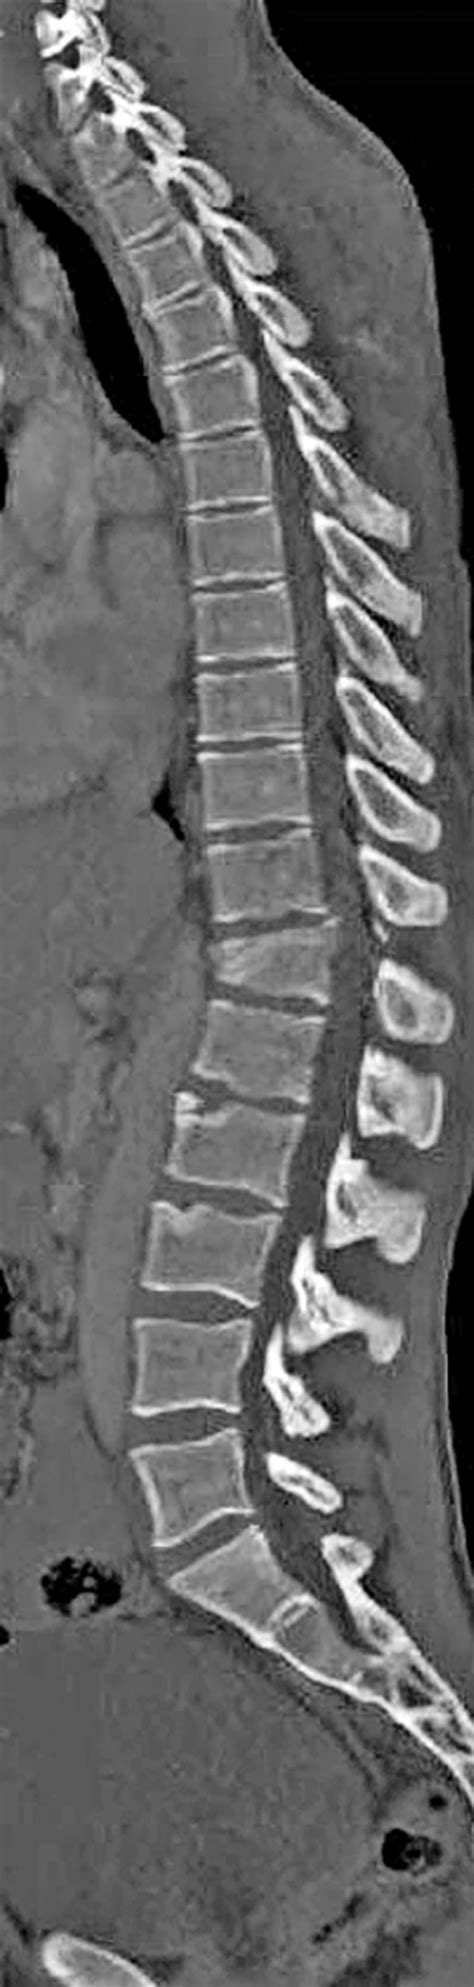 Full Length Spine Ct And Mri In Daily Practice Radiology Key